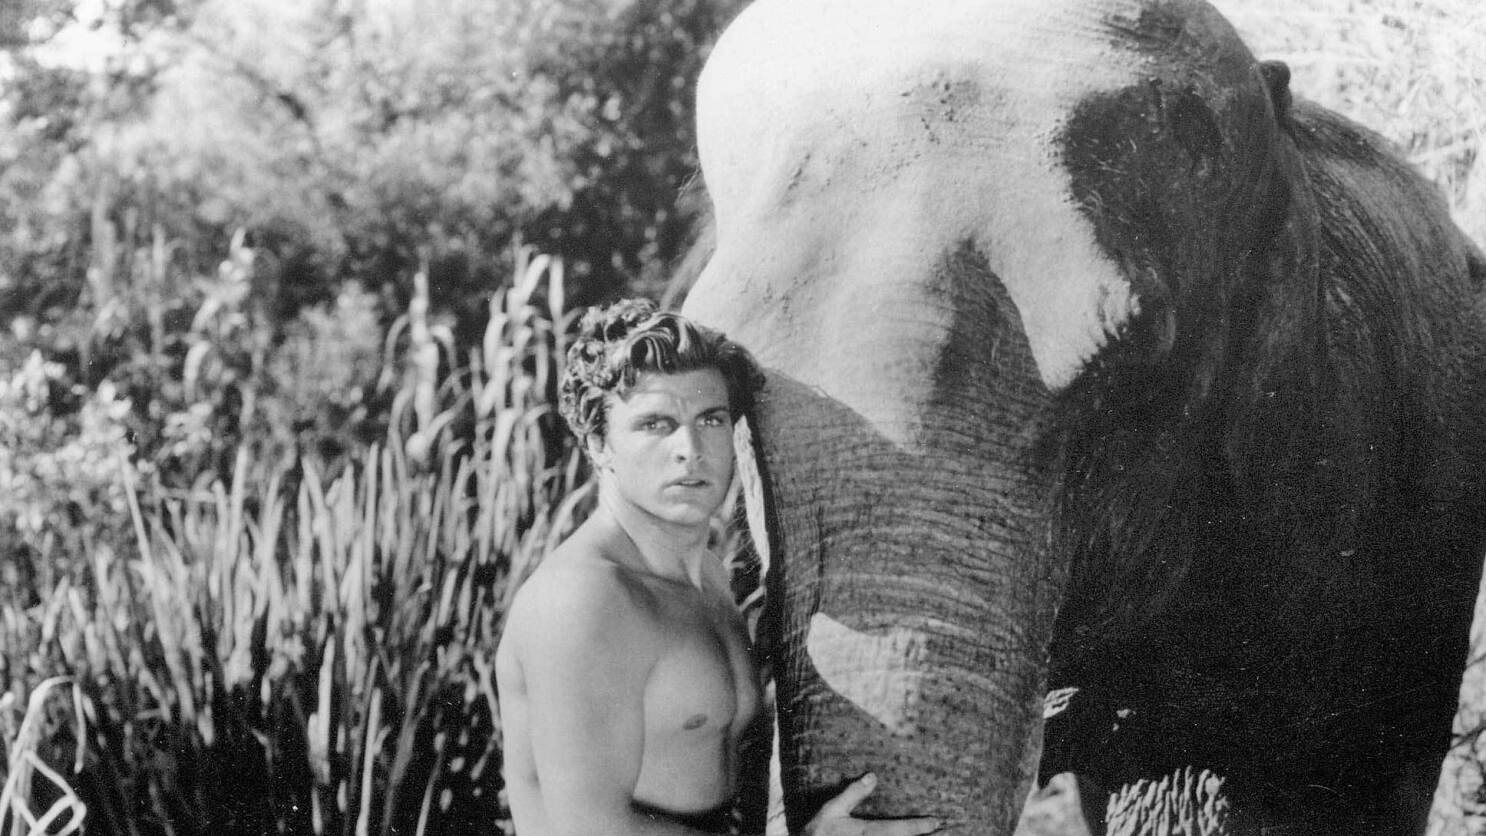 Hollywood Production, Buster Crabbe Director of Water Sport…